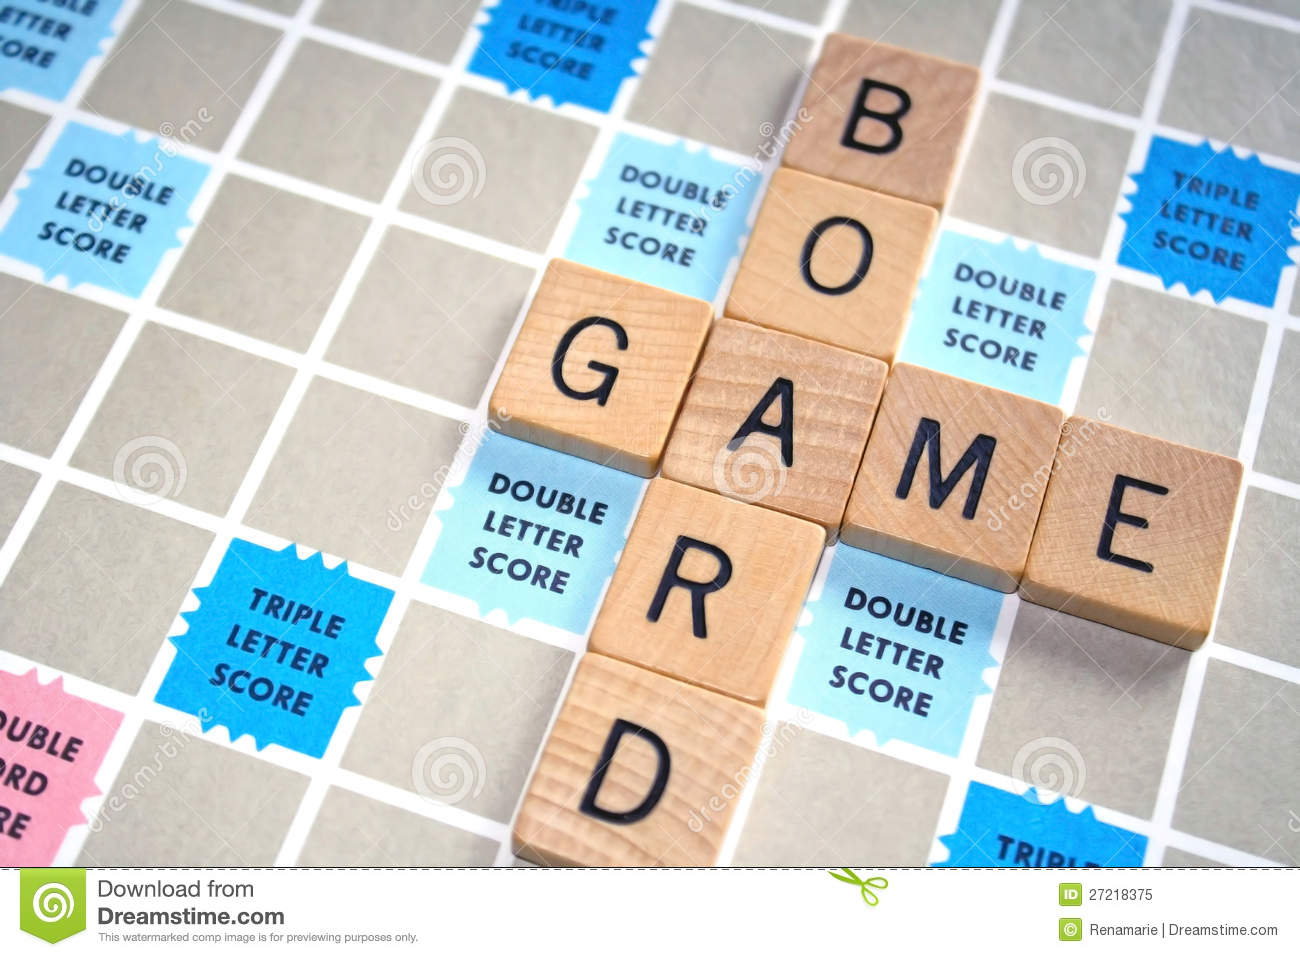 Board Game Royalty Free Stock Photo   Image  27218375